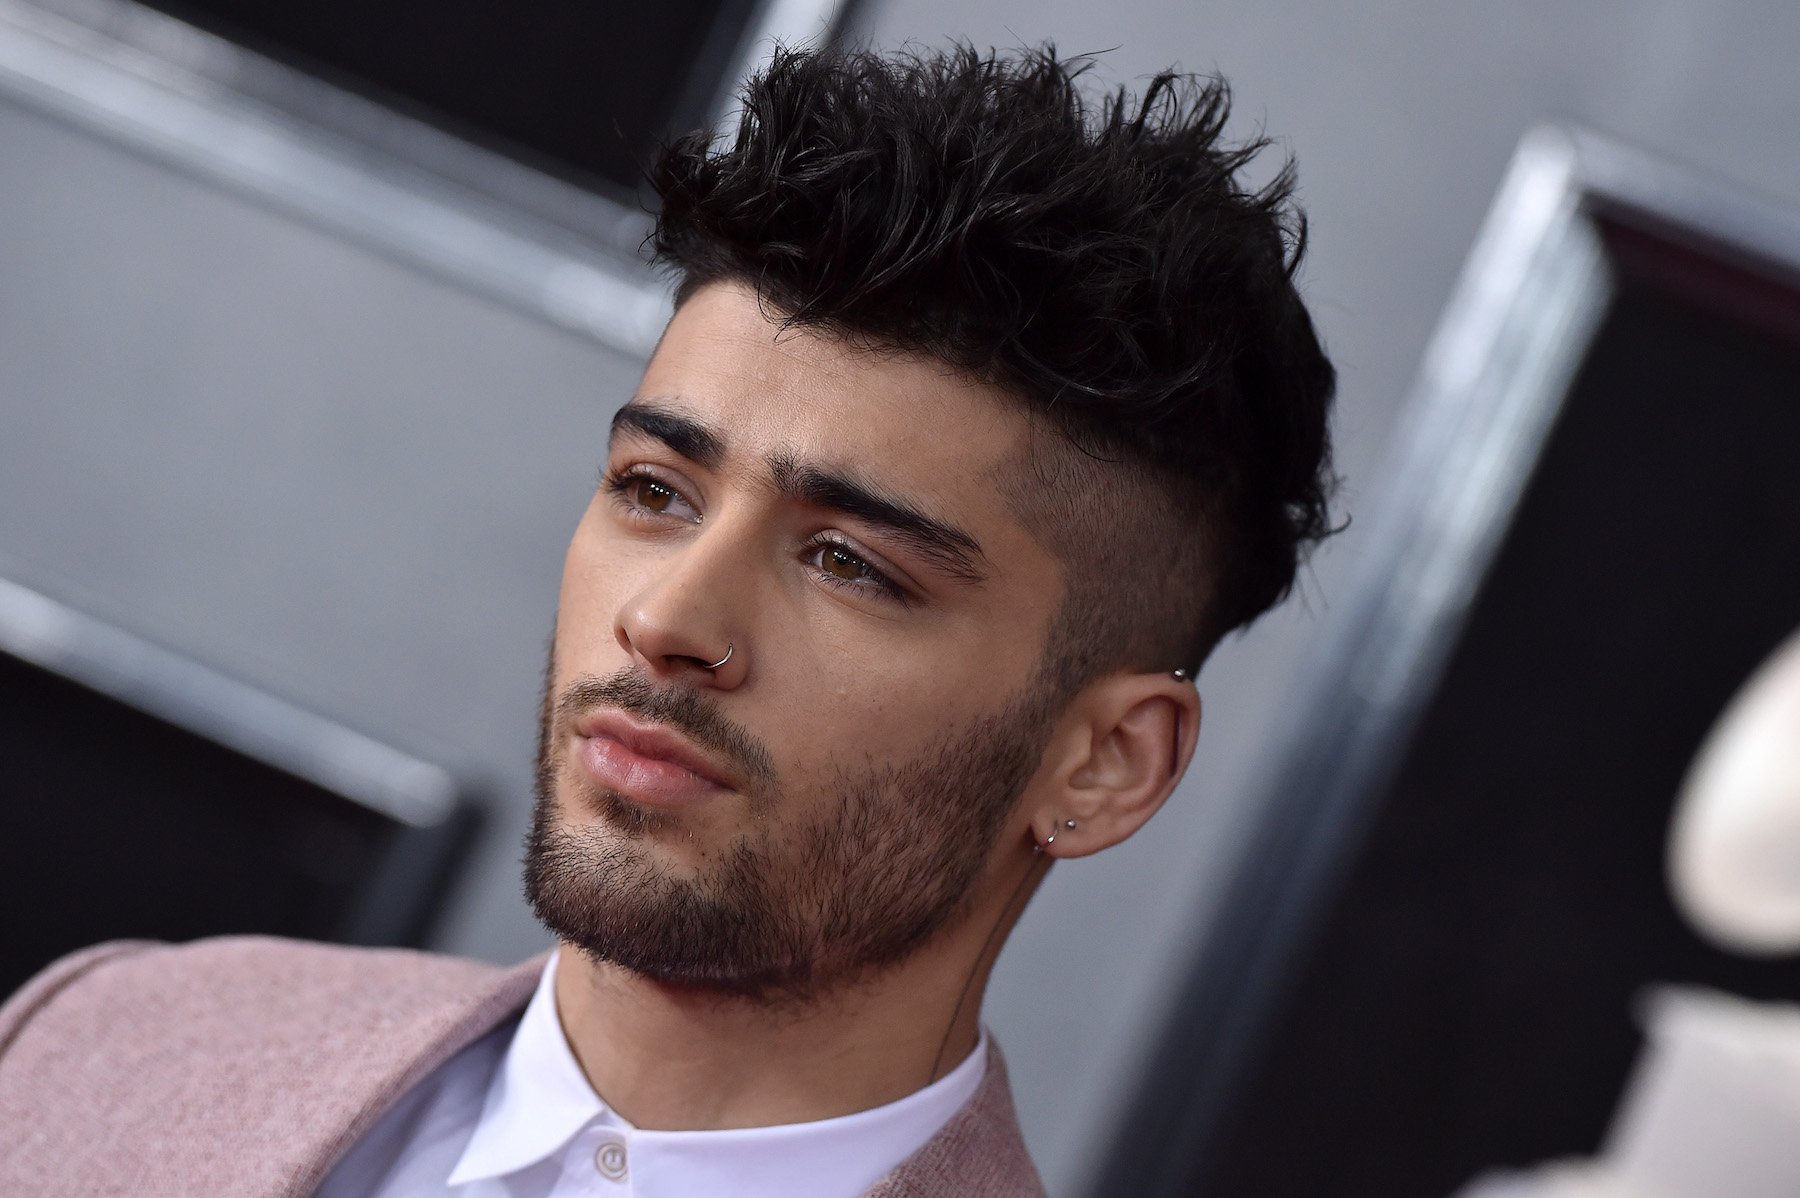 Zayn Malik, who incorporated Jimi Hendrix's song 'Angel' in his new music, posing for a photo